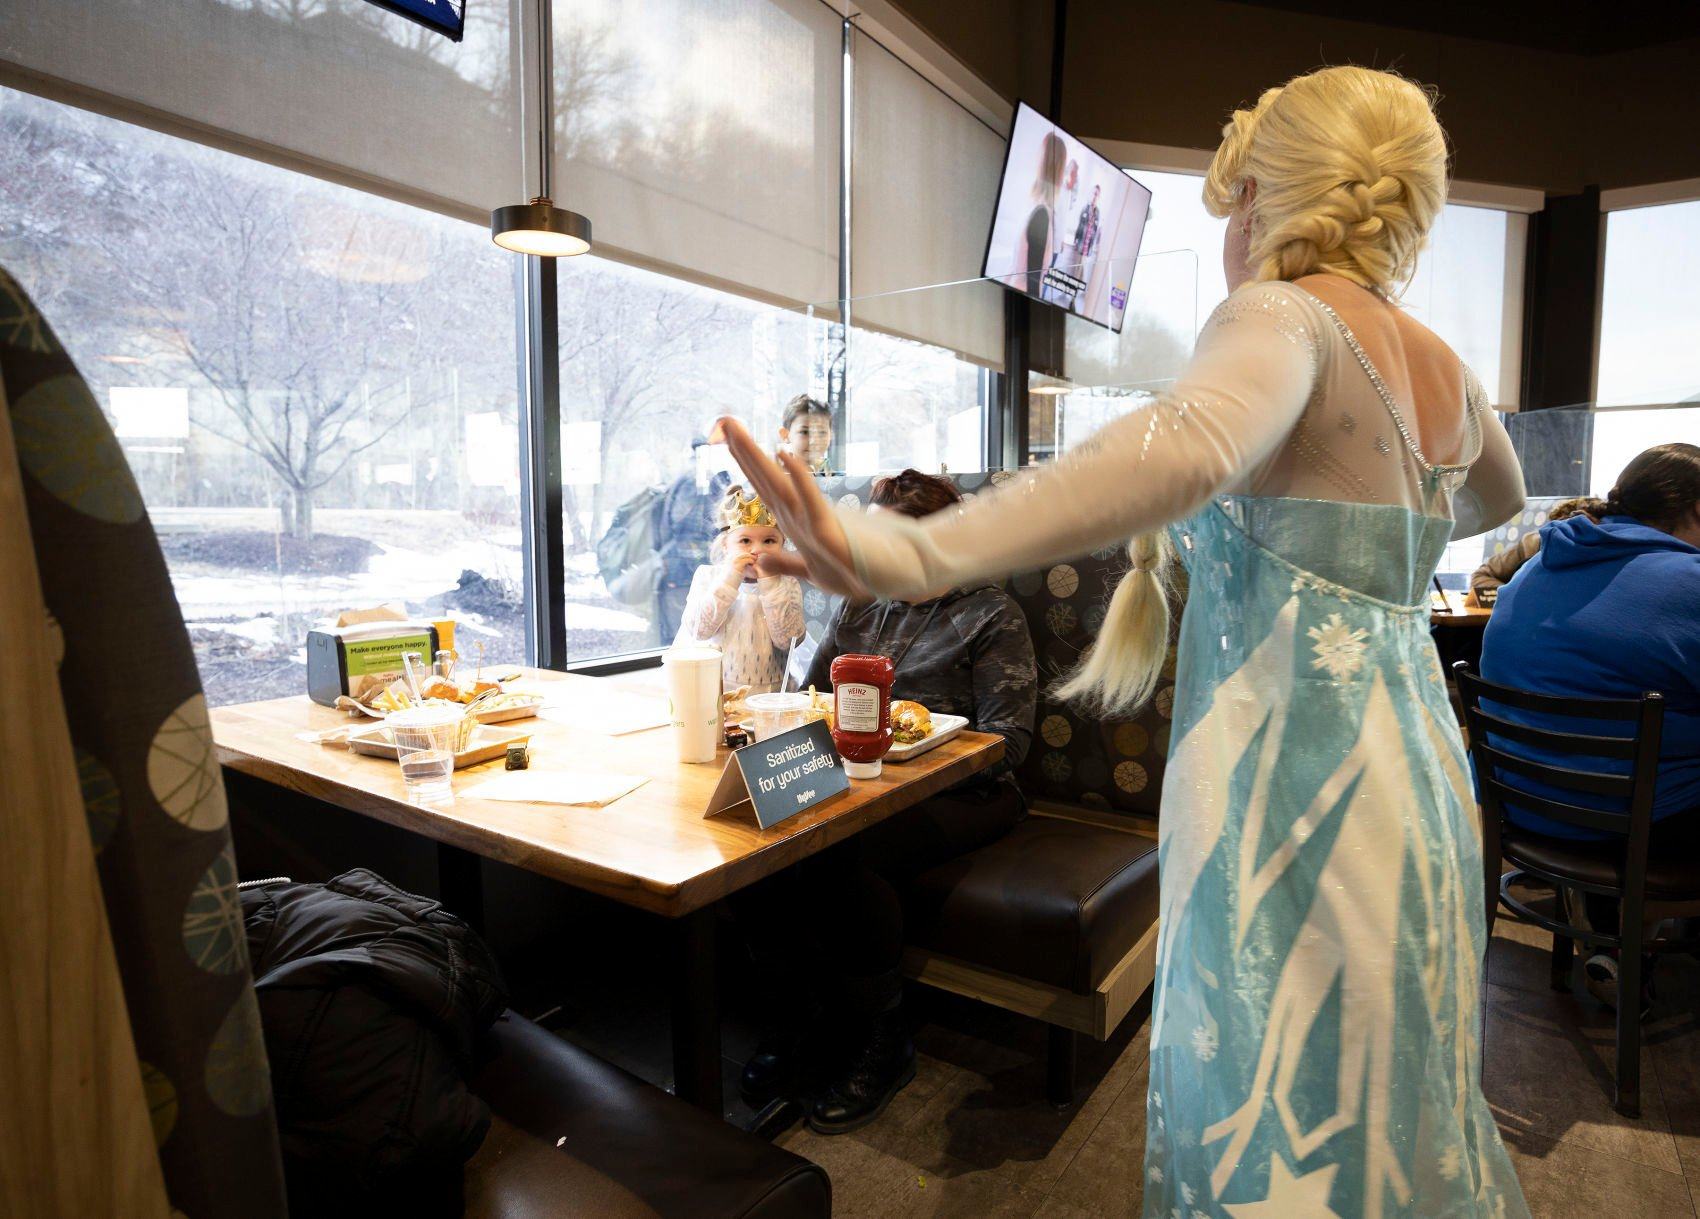 Traci Yeo, as Elsa, and owner of Royal T Princesses and Superheroes, sings to customers at Wahlburgers in Hy-Vee on South Locust Street in Dubuque on Friday.    PHOTO CREDIT: Stephen Gassman